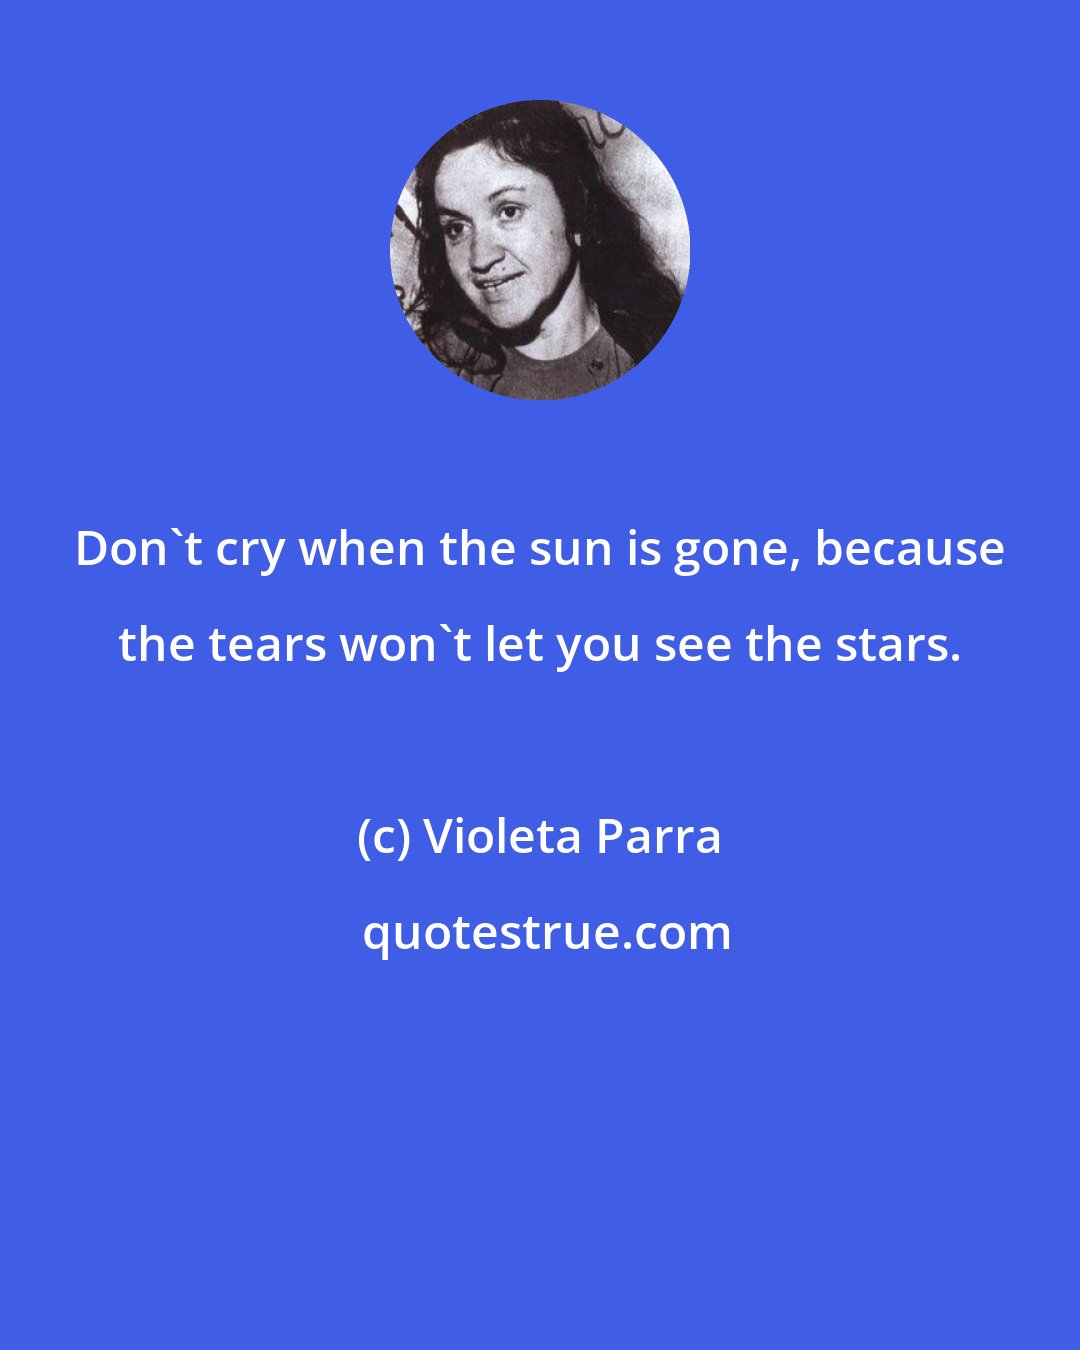 Violeta Parra: Don't cry when the sun is gone, because the tears won't let you see the stars.